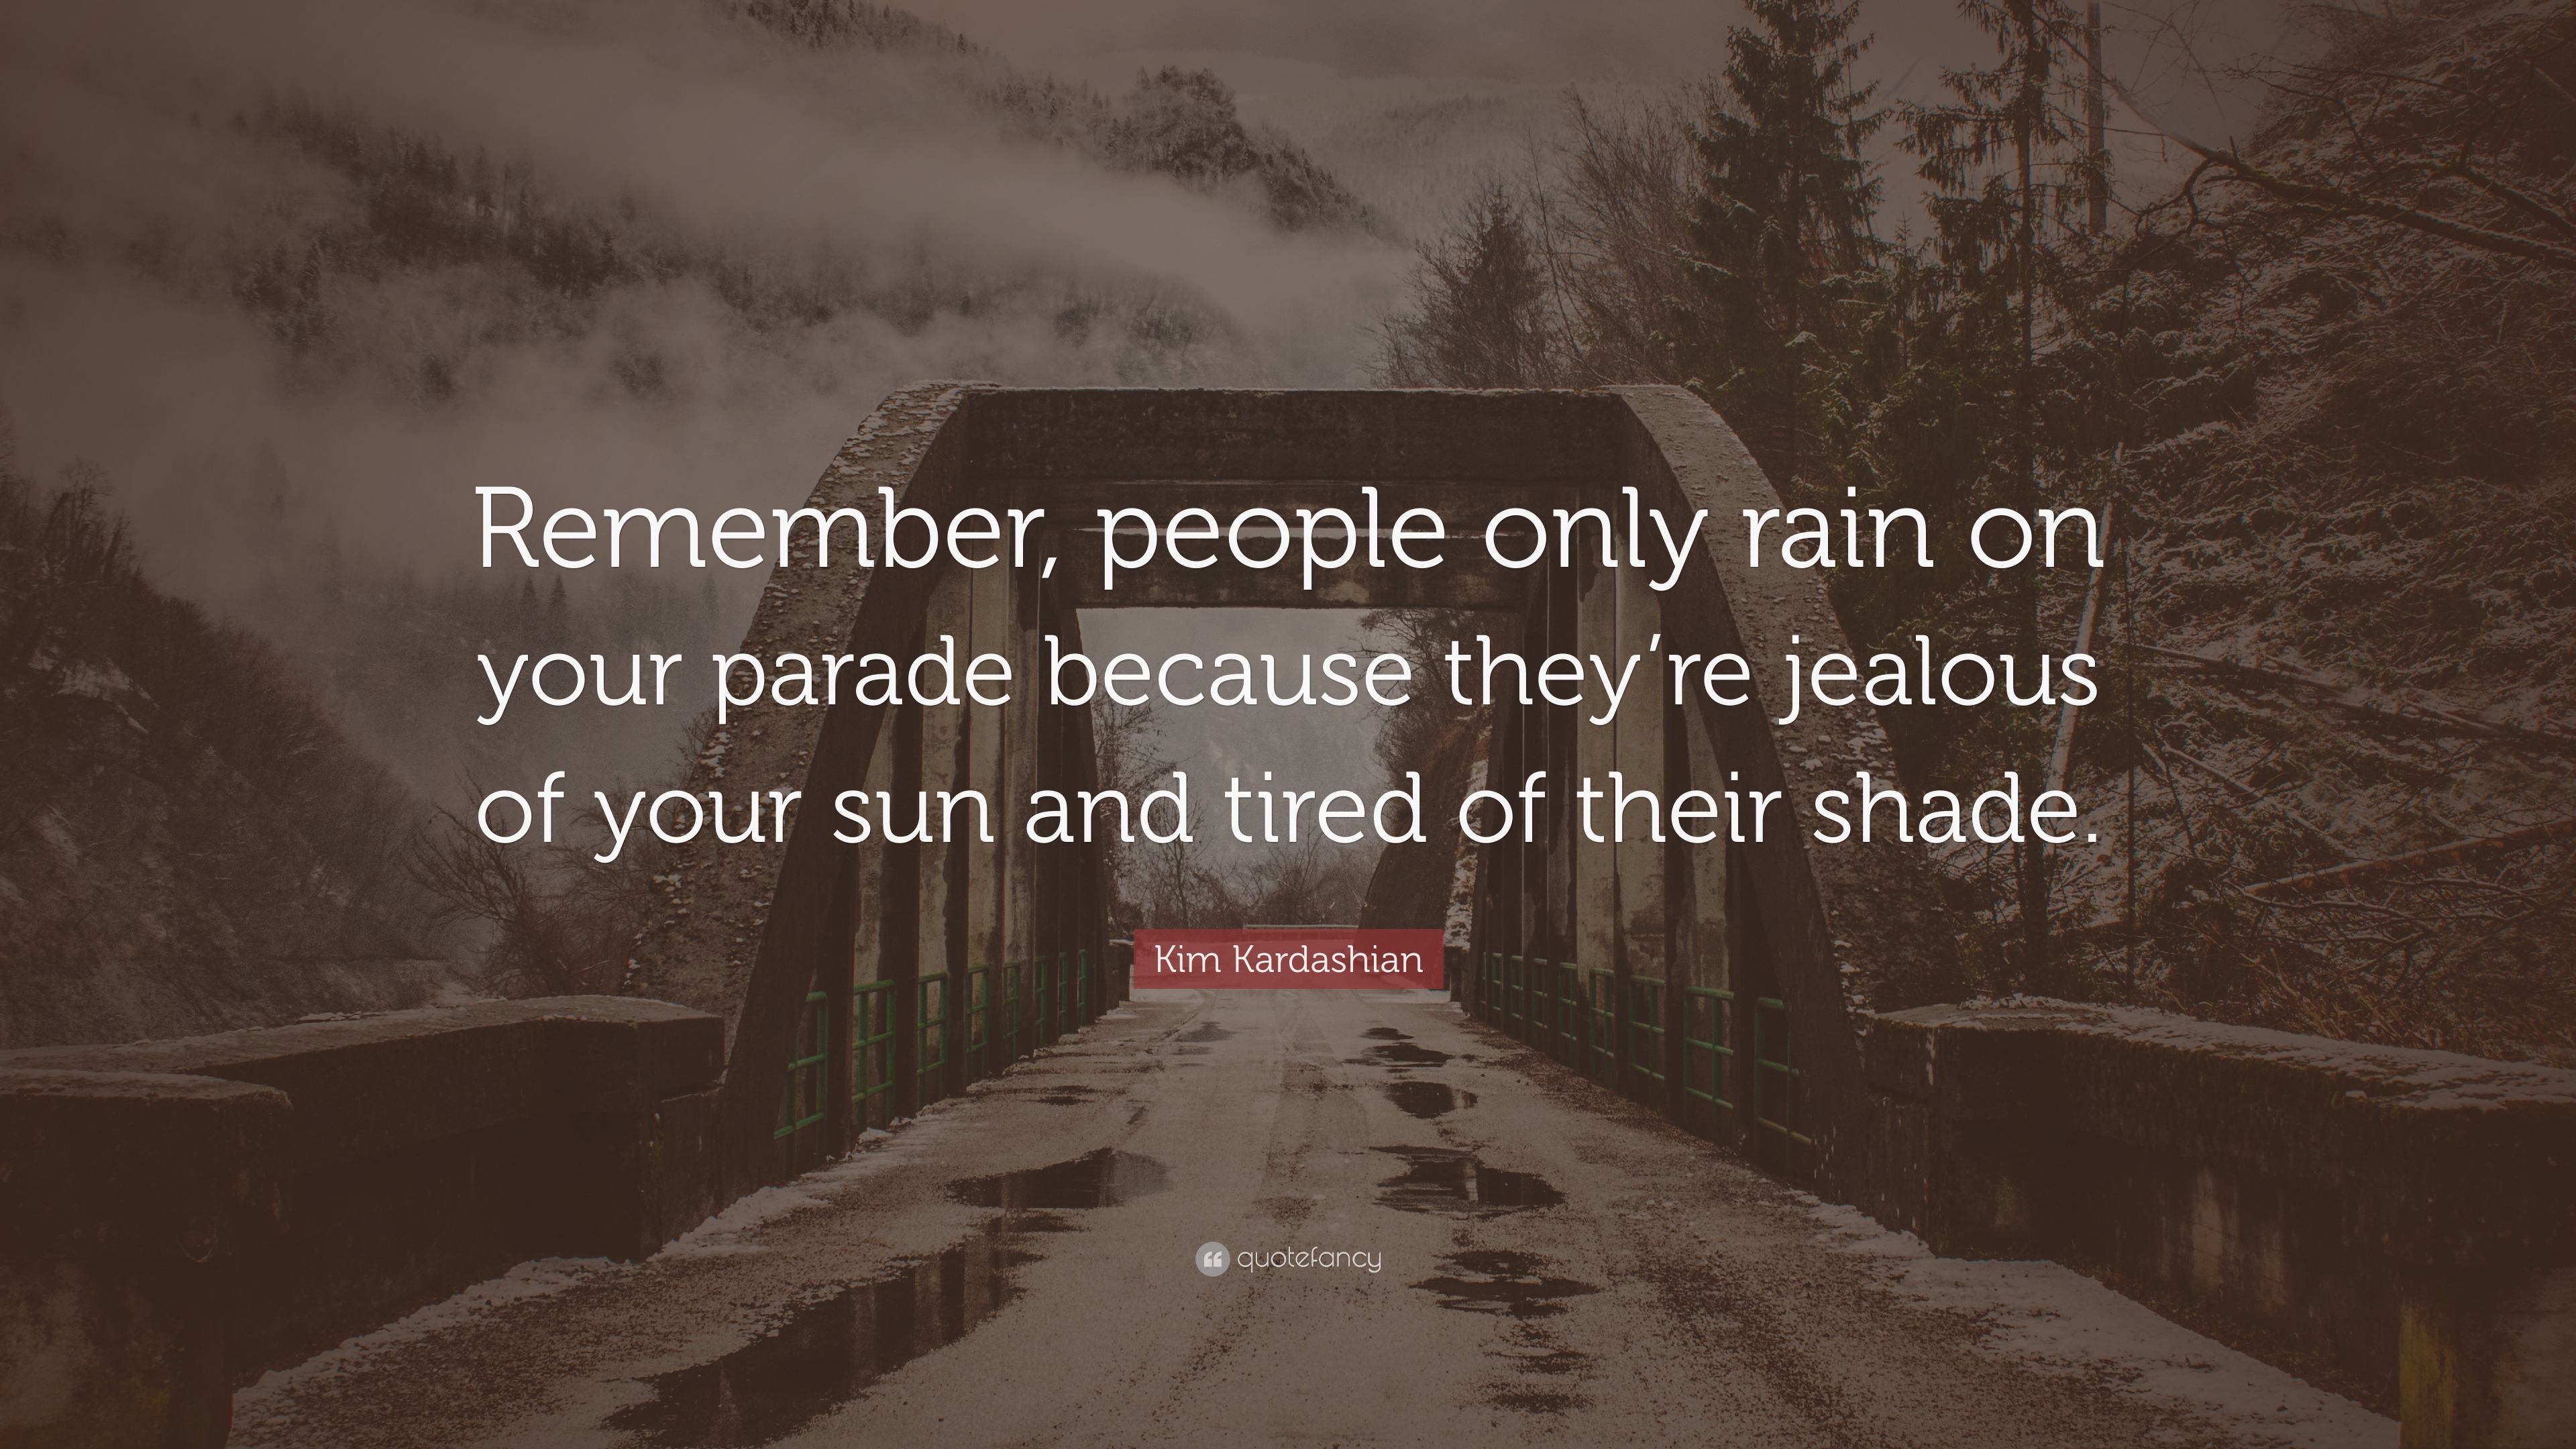 Someone is going to rain on your parade - if you let them